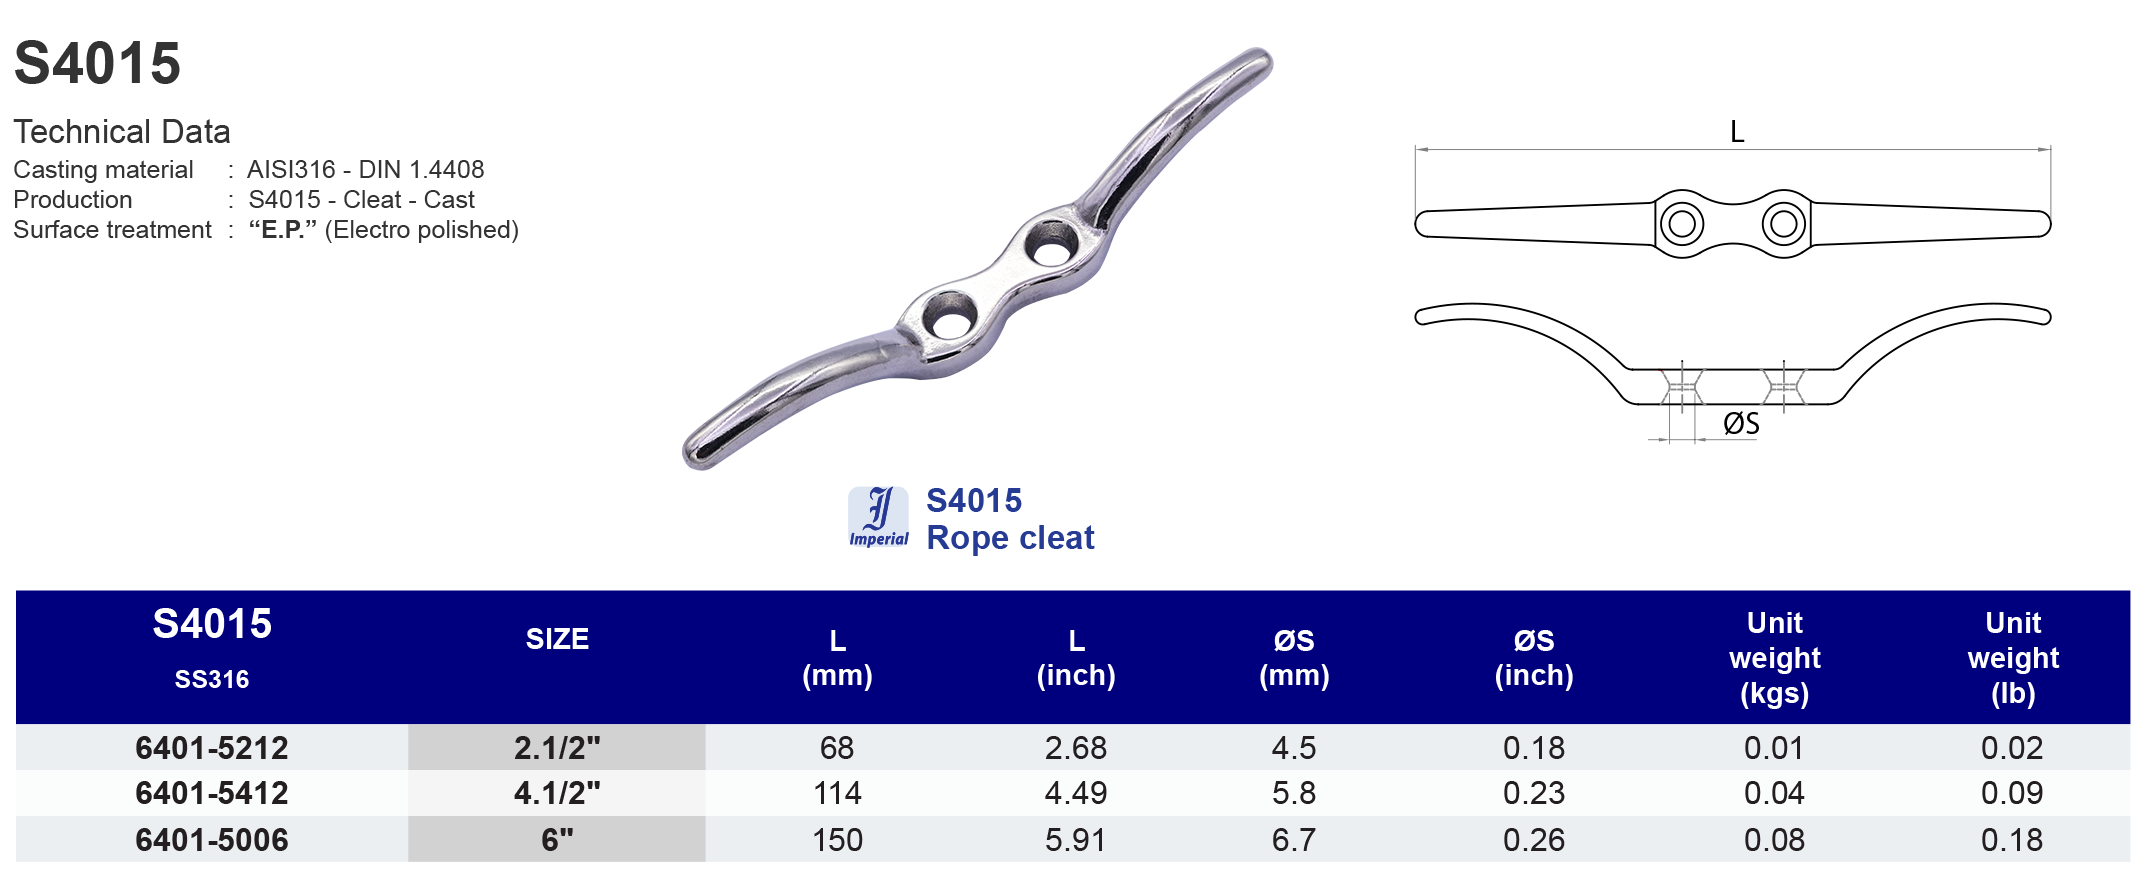 S4015 Rope cleat - 316